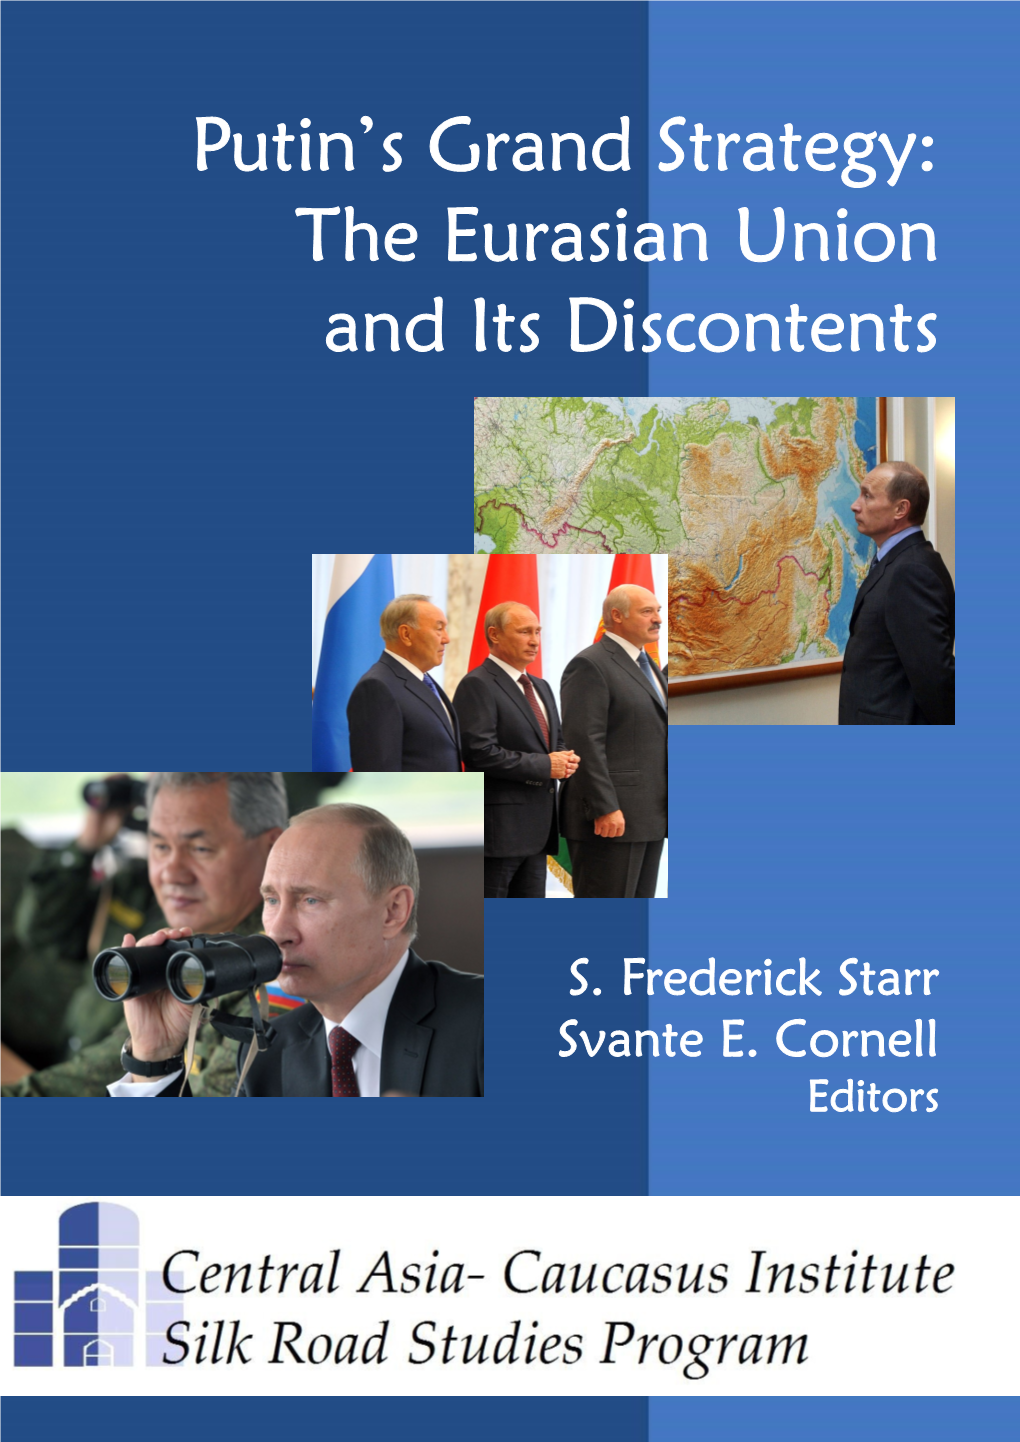 Putin's Grand Strategy: the Eurasian Union and Its Discontents